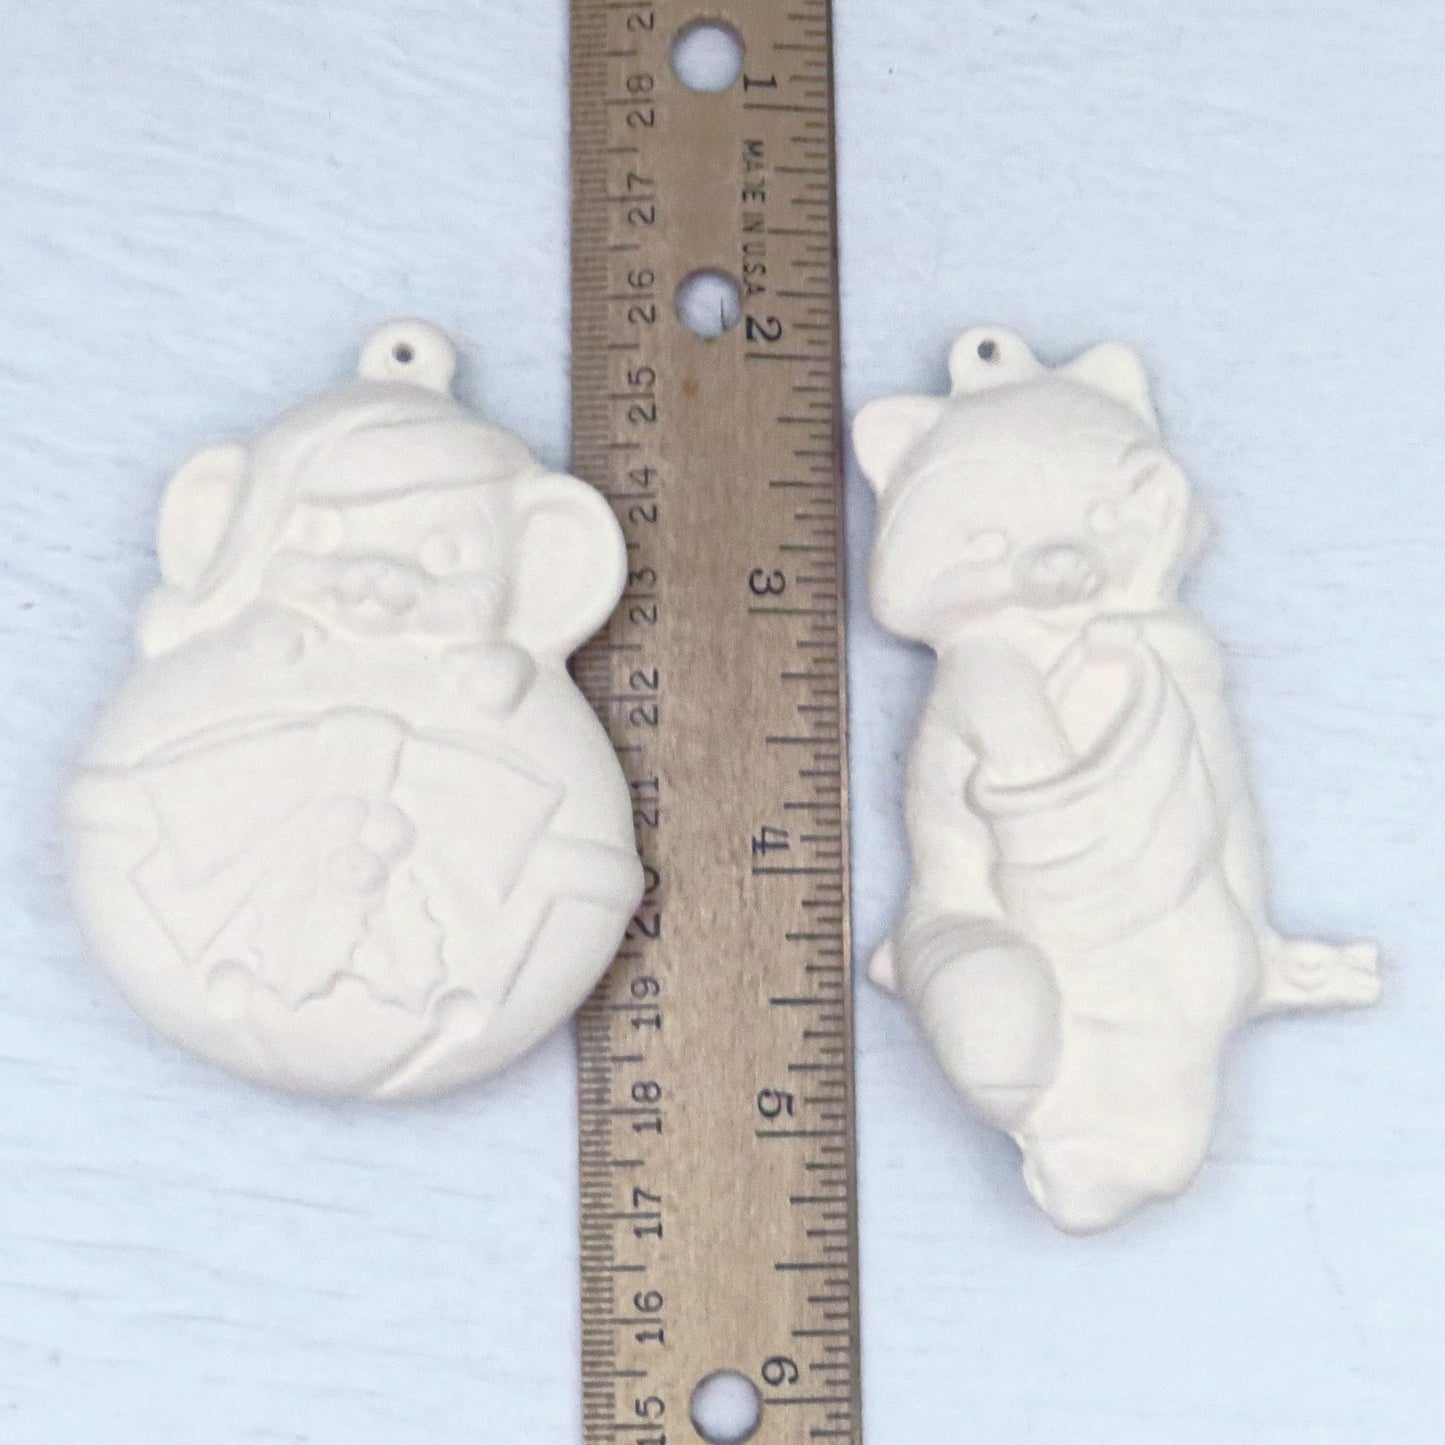 Ready to Paint Ceramic Cat and Mouse Christmas Tree Ornaments, Unpainted Christmas Decor